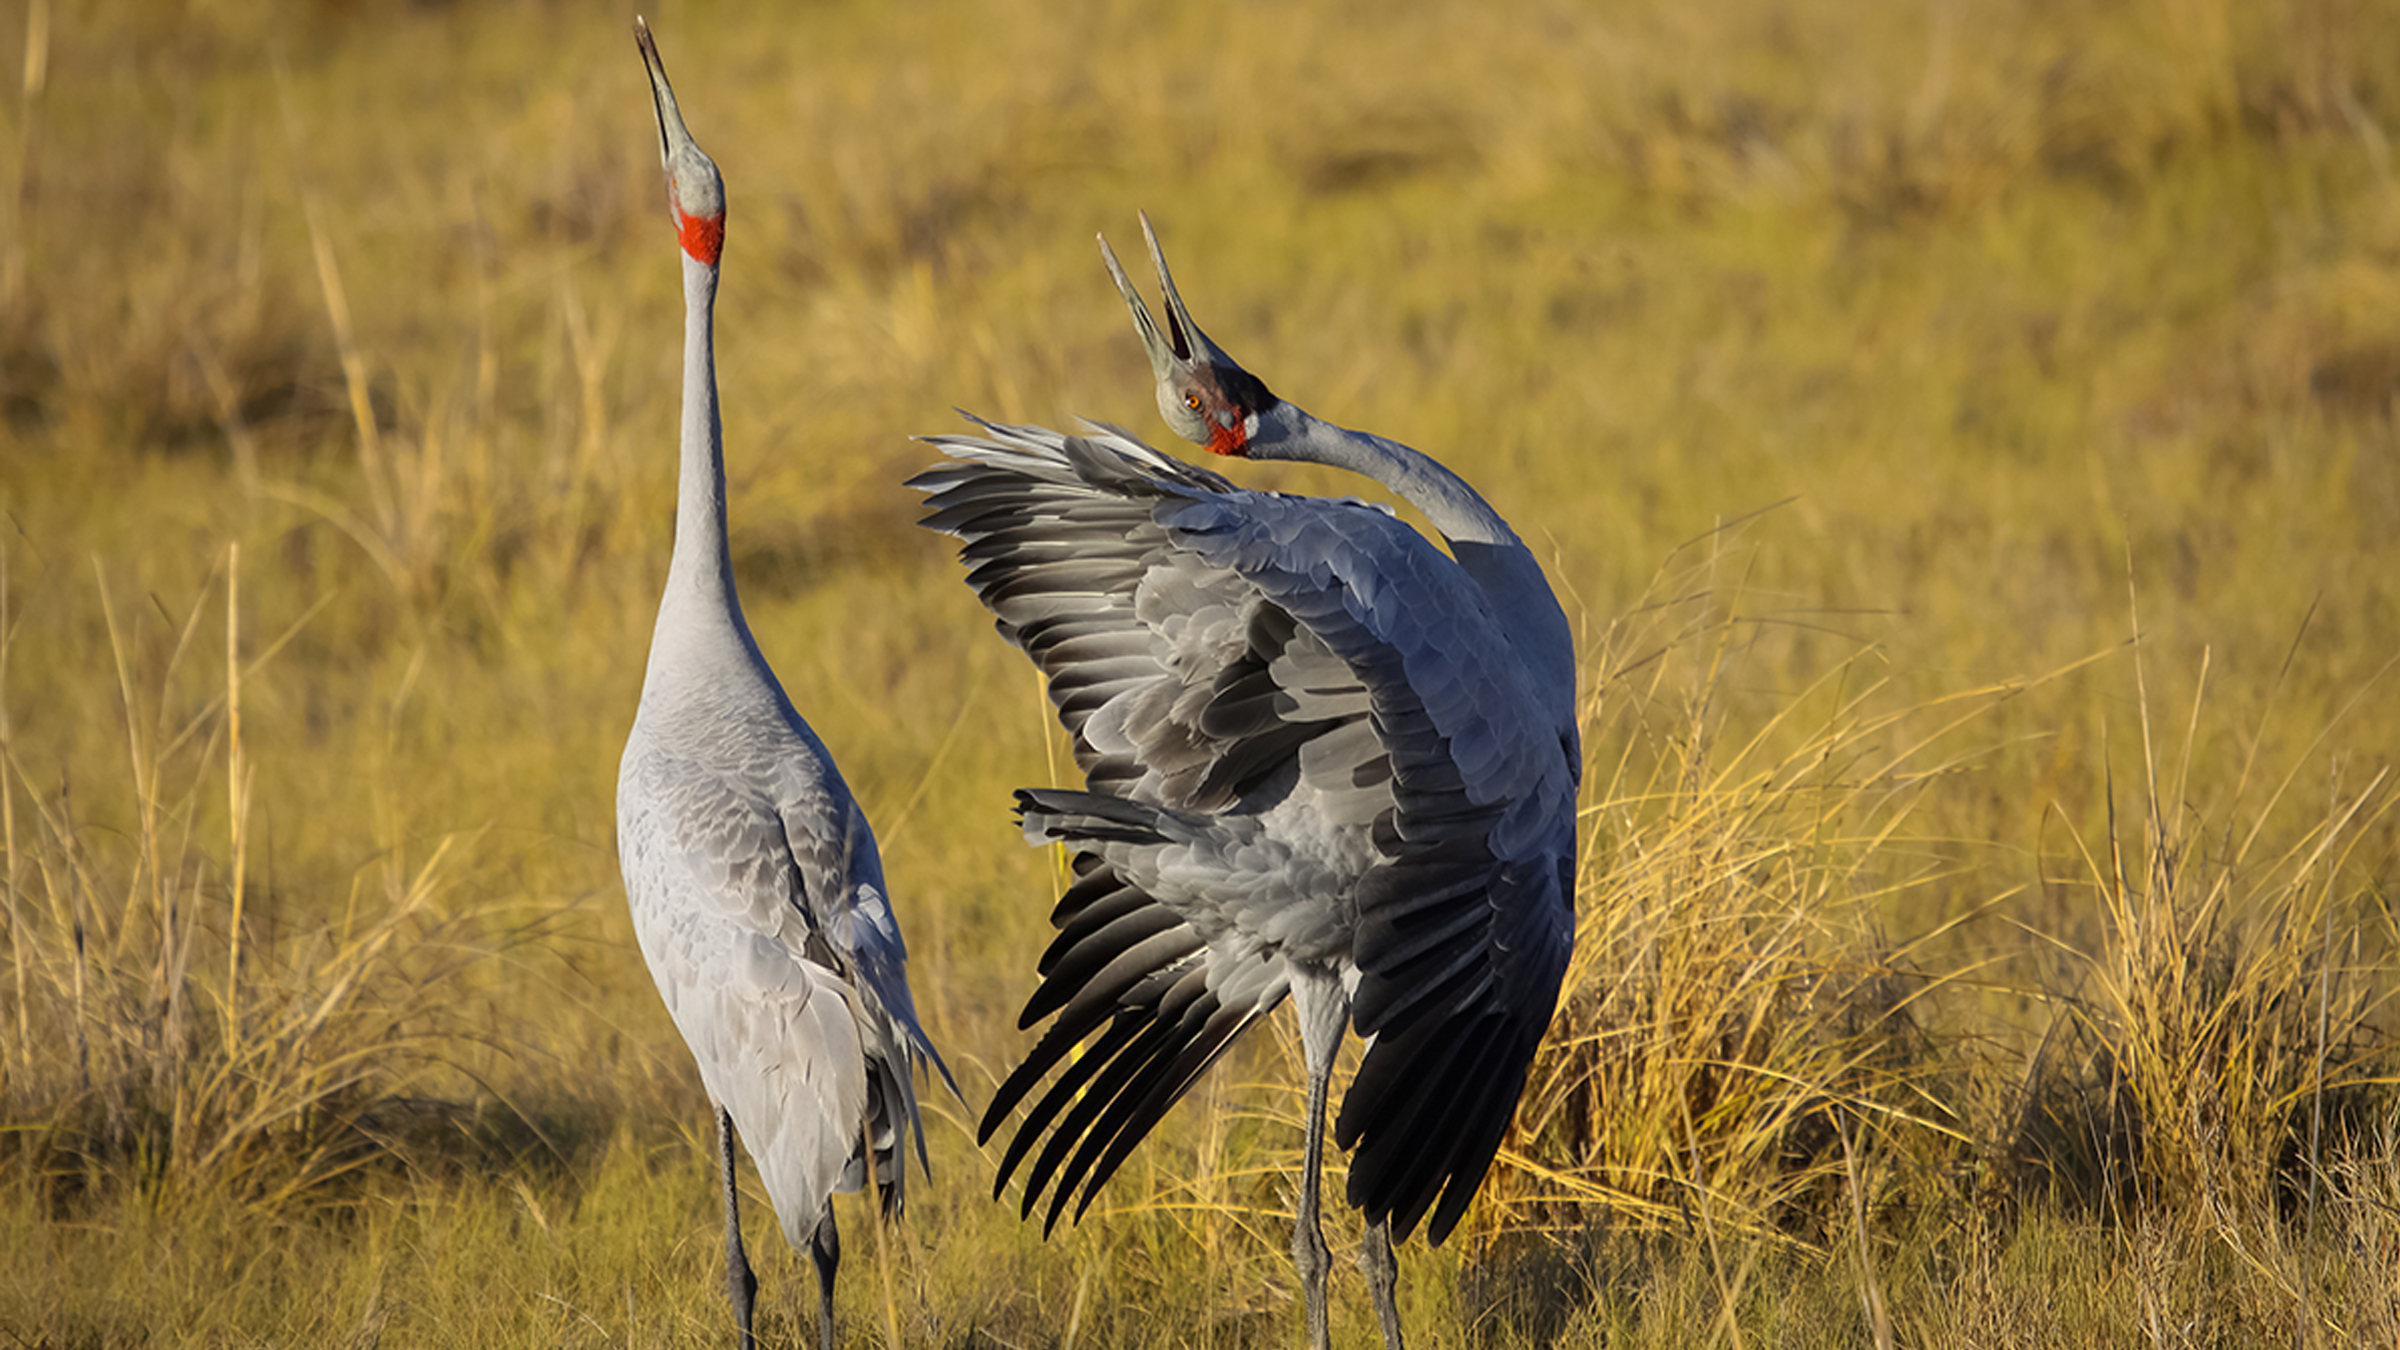 Strange love: 13 animals with truly weird courtship rituals | Live Science